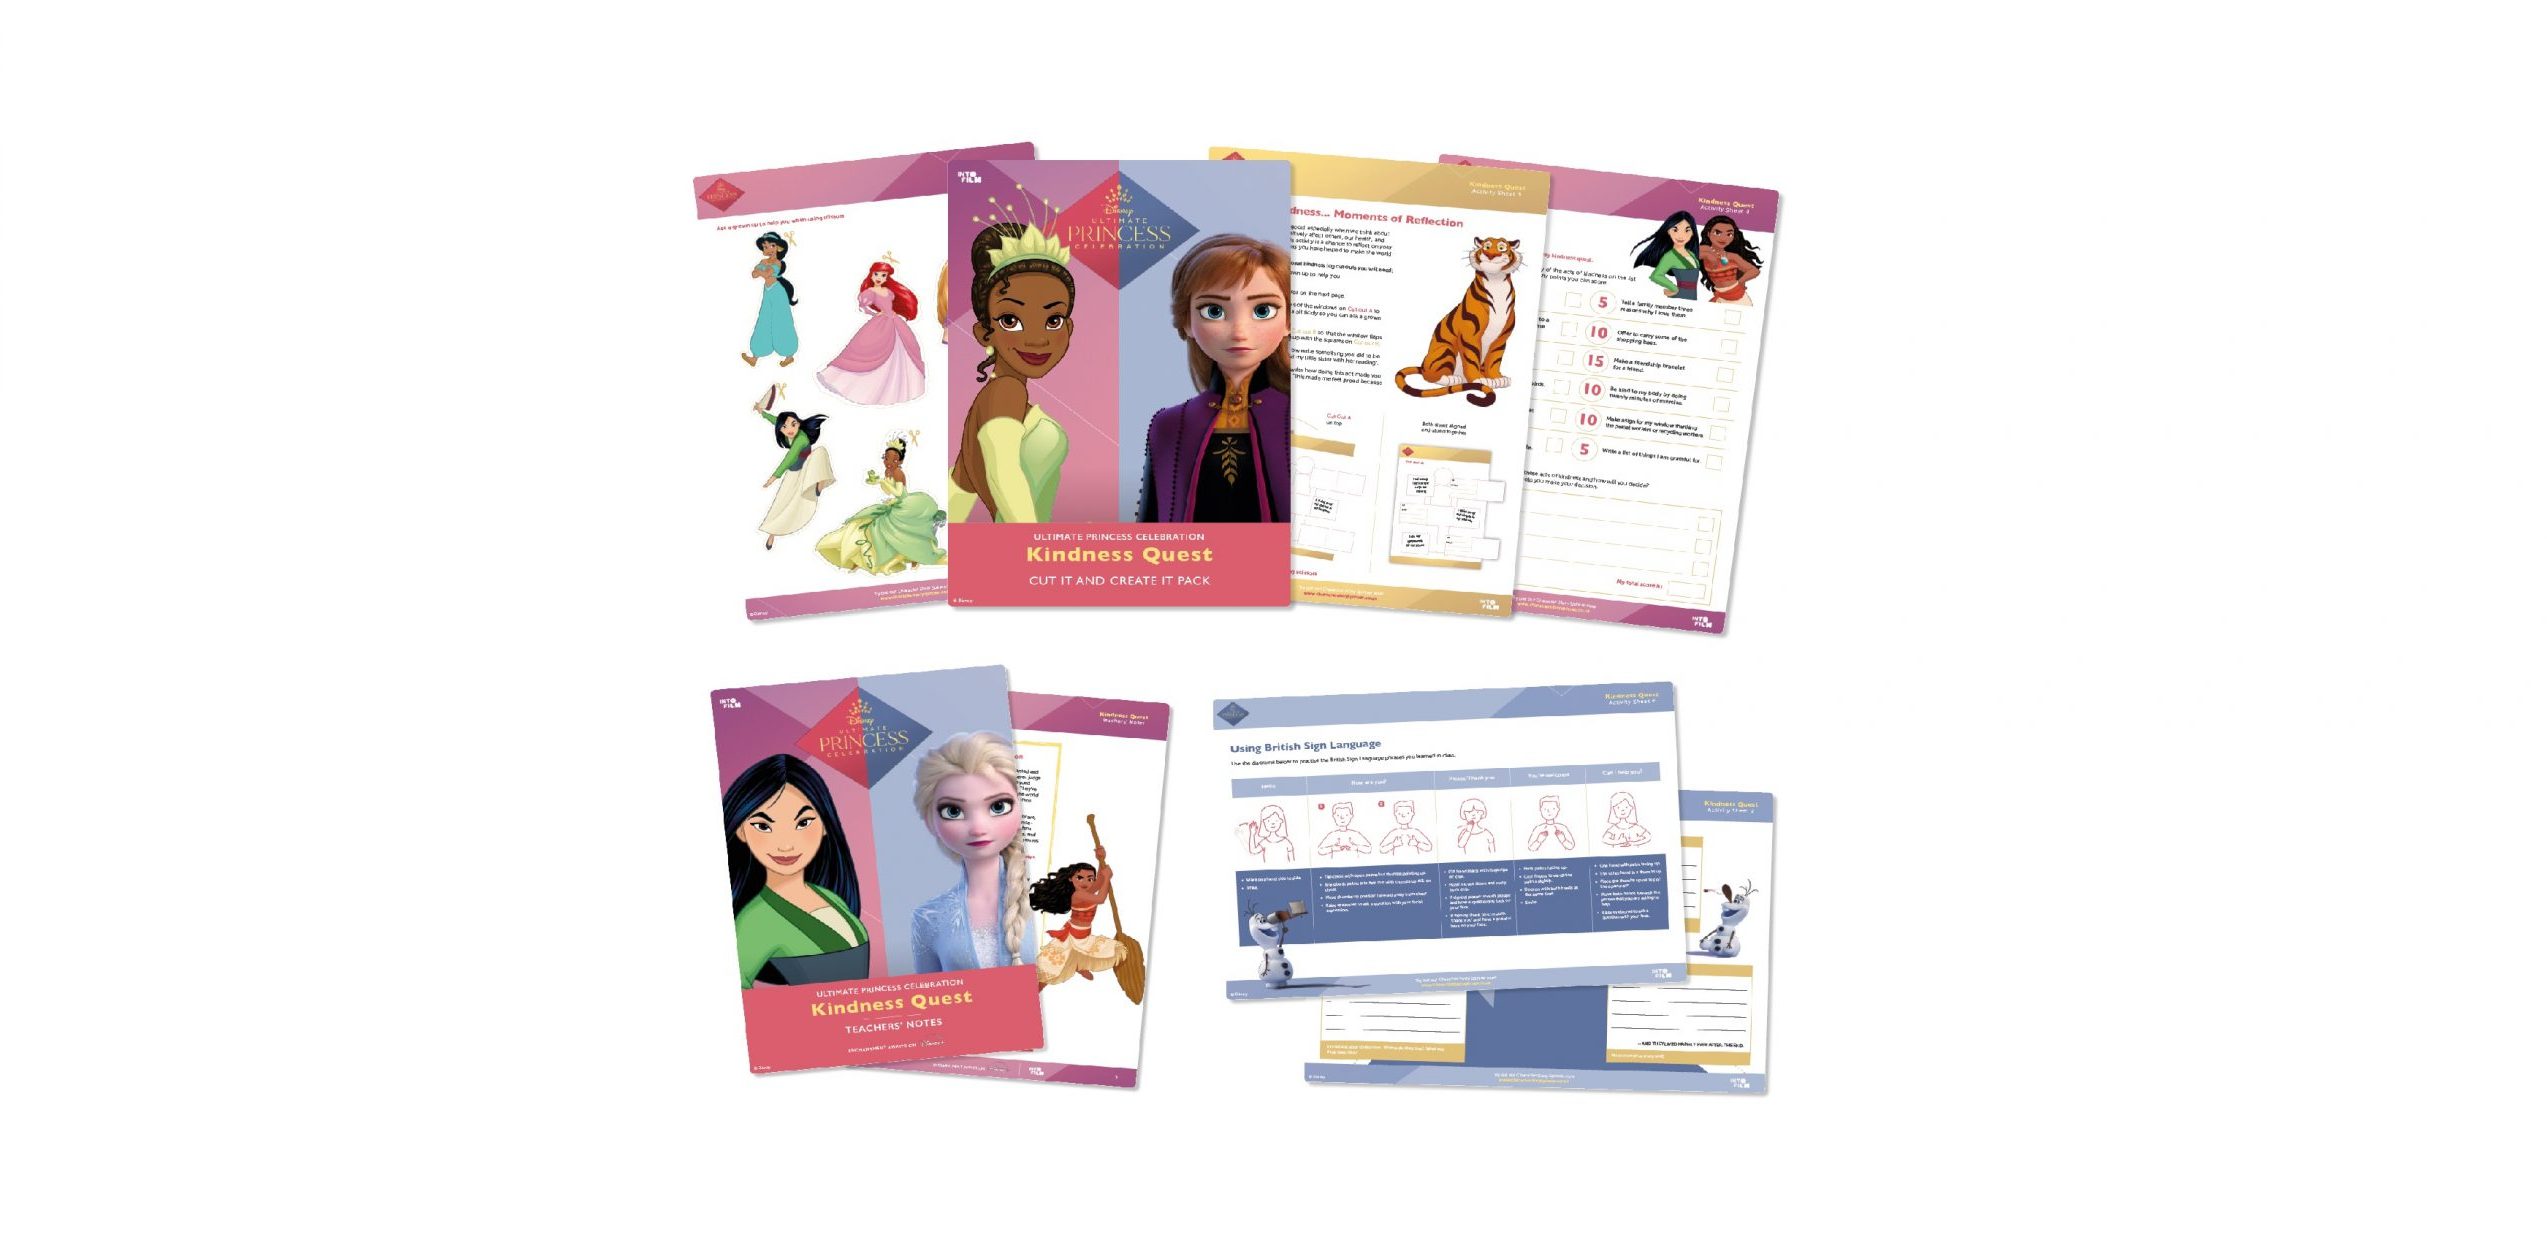 Into Film and Disney UK launch Ultimate Princess Celebration: Kindness Quest learning resource to promote kindness and bravery